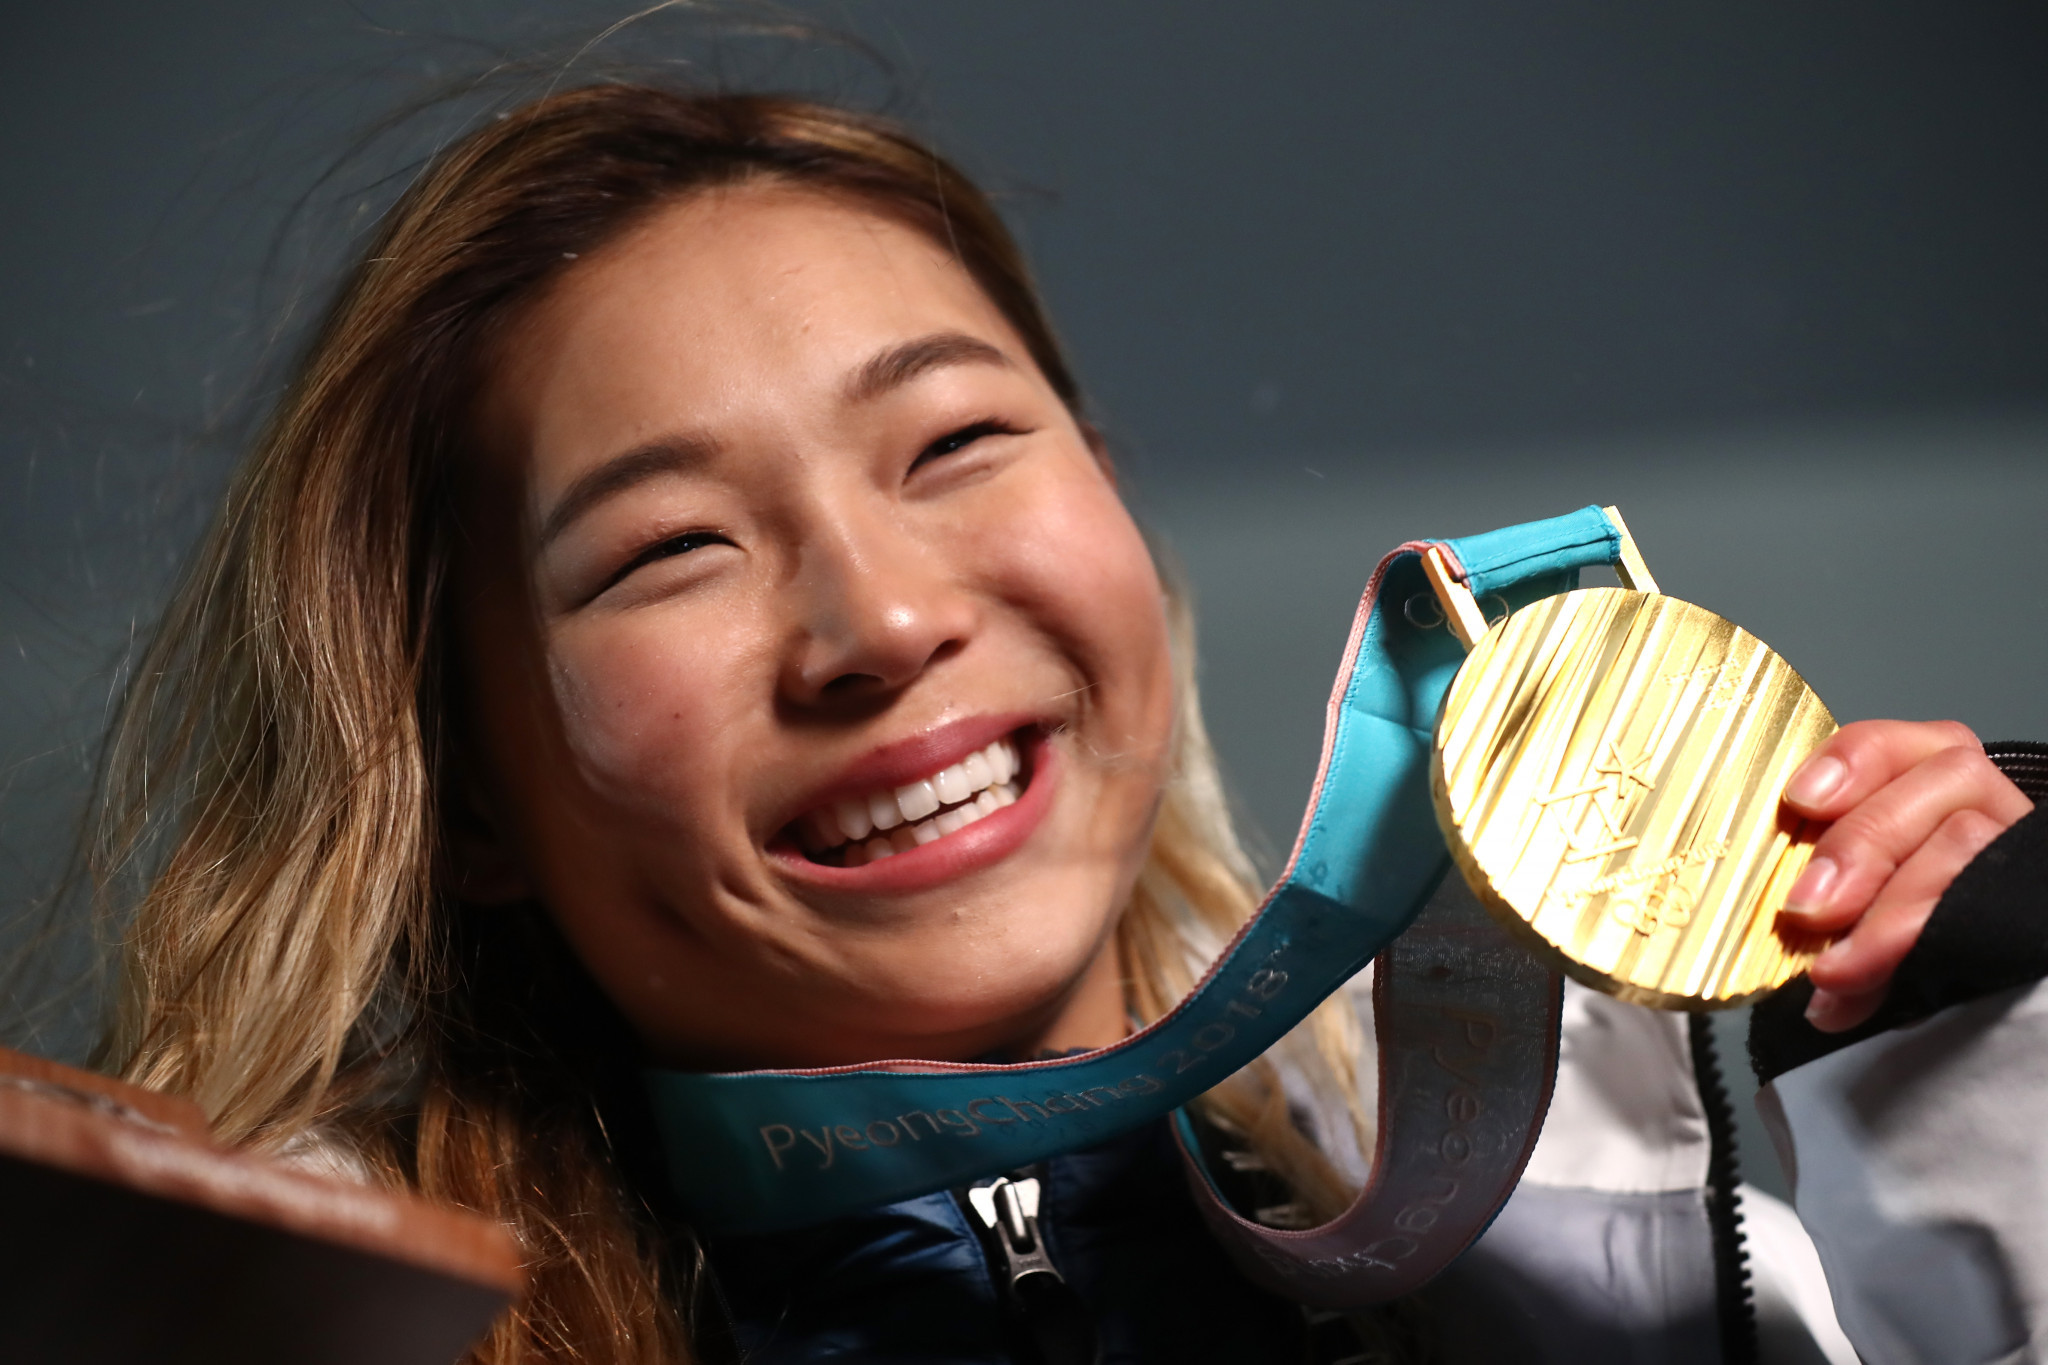 Kim became the youngest woman to win an Olympic snowboarding gold medal ©Getty Images